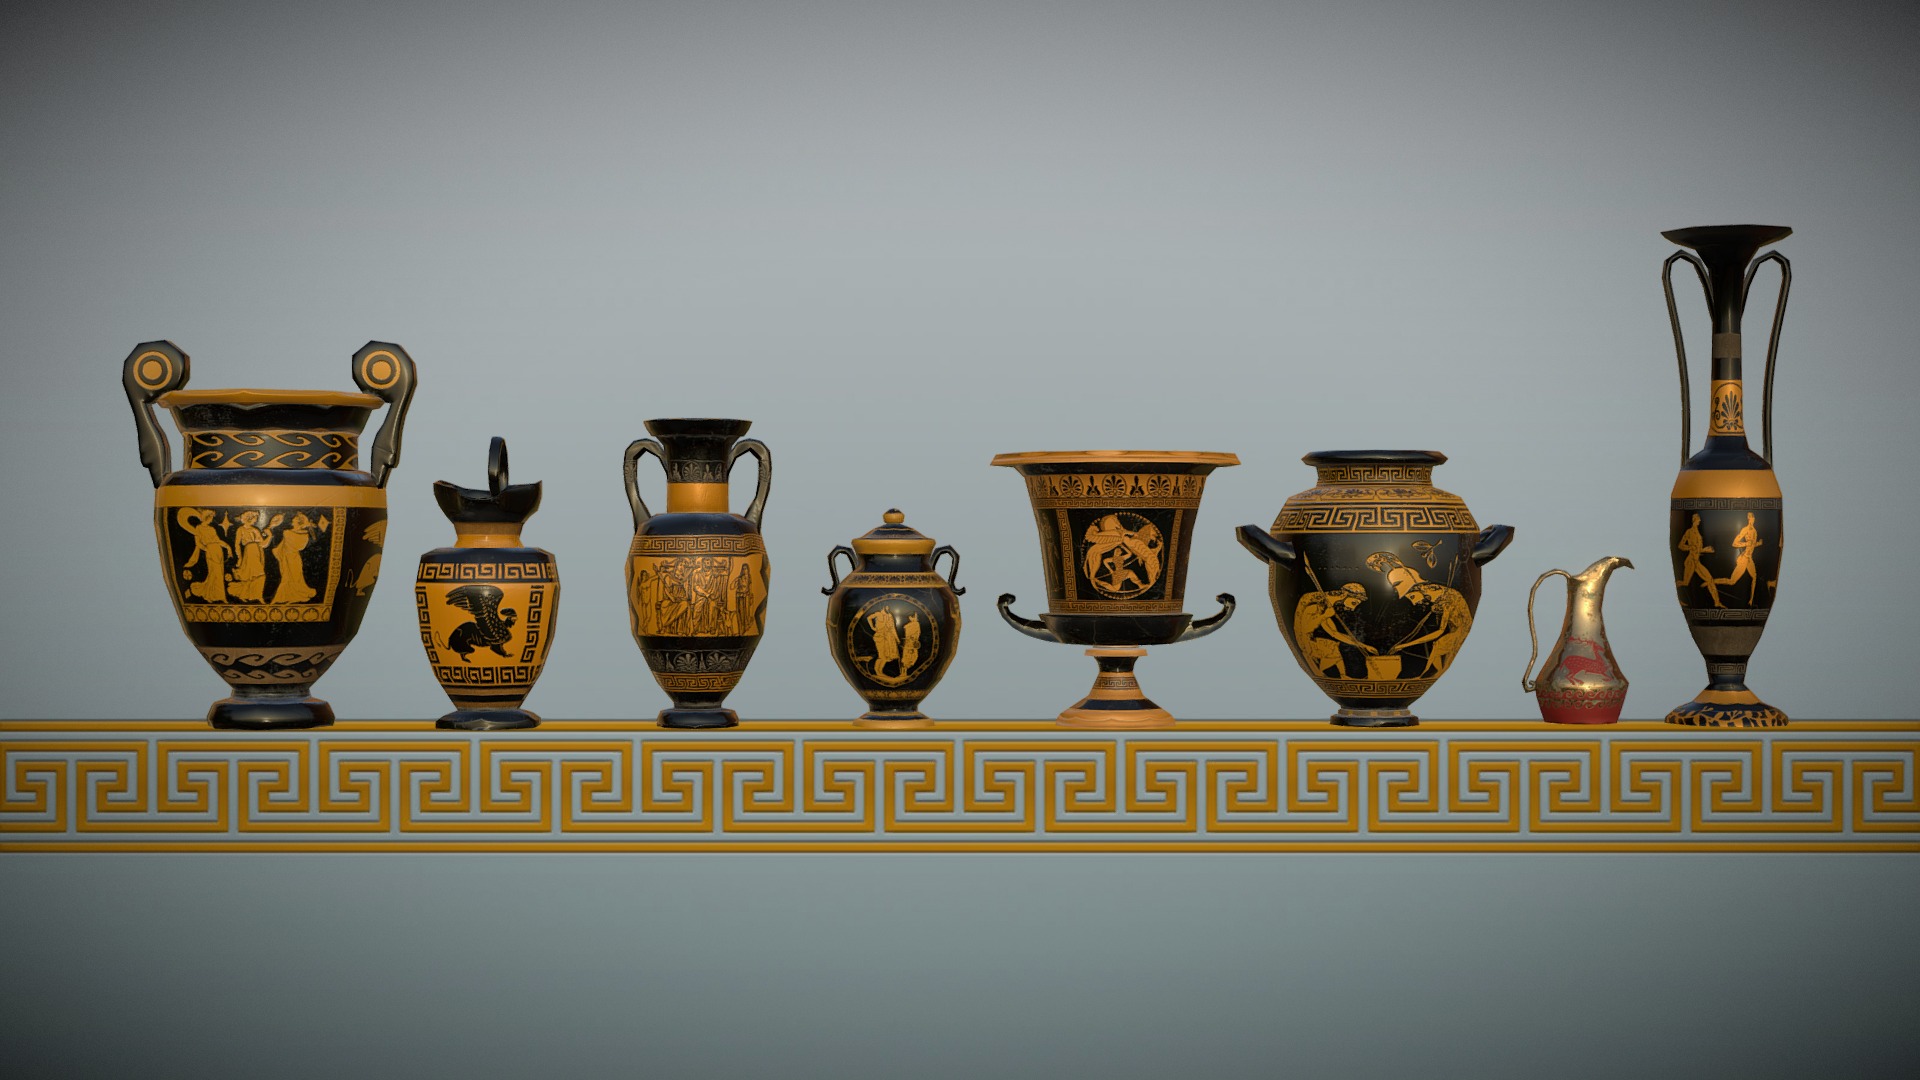 3D model Low Poly Grecian Pots - This is a 3D model of the Low Poly Grecian Pots. The 3D model is about a group of vases on a shelf.